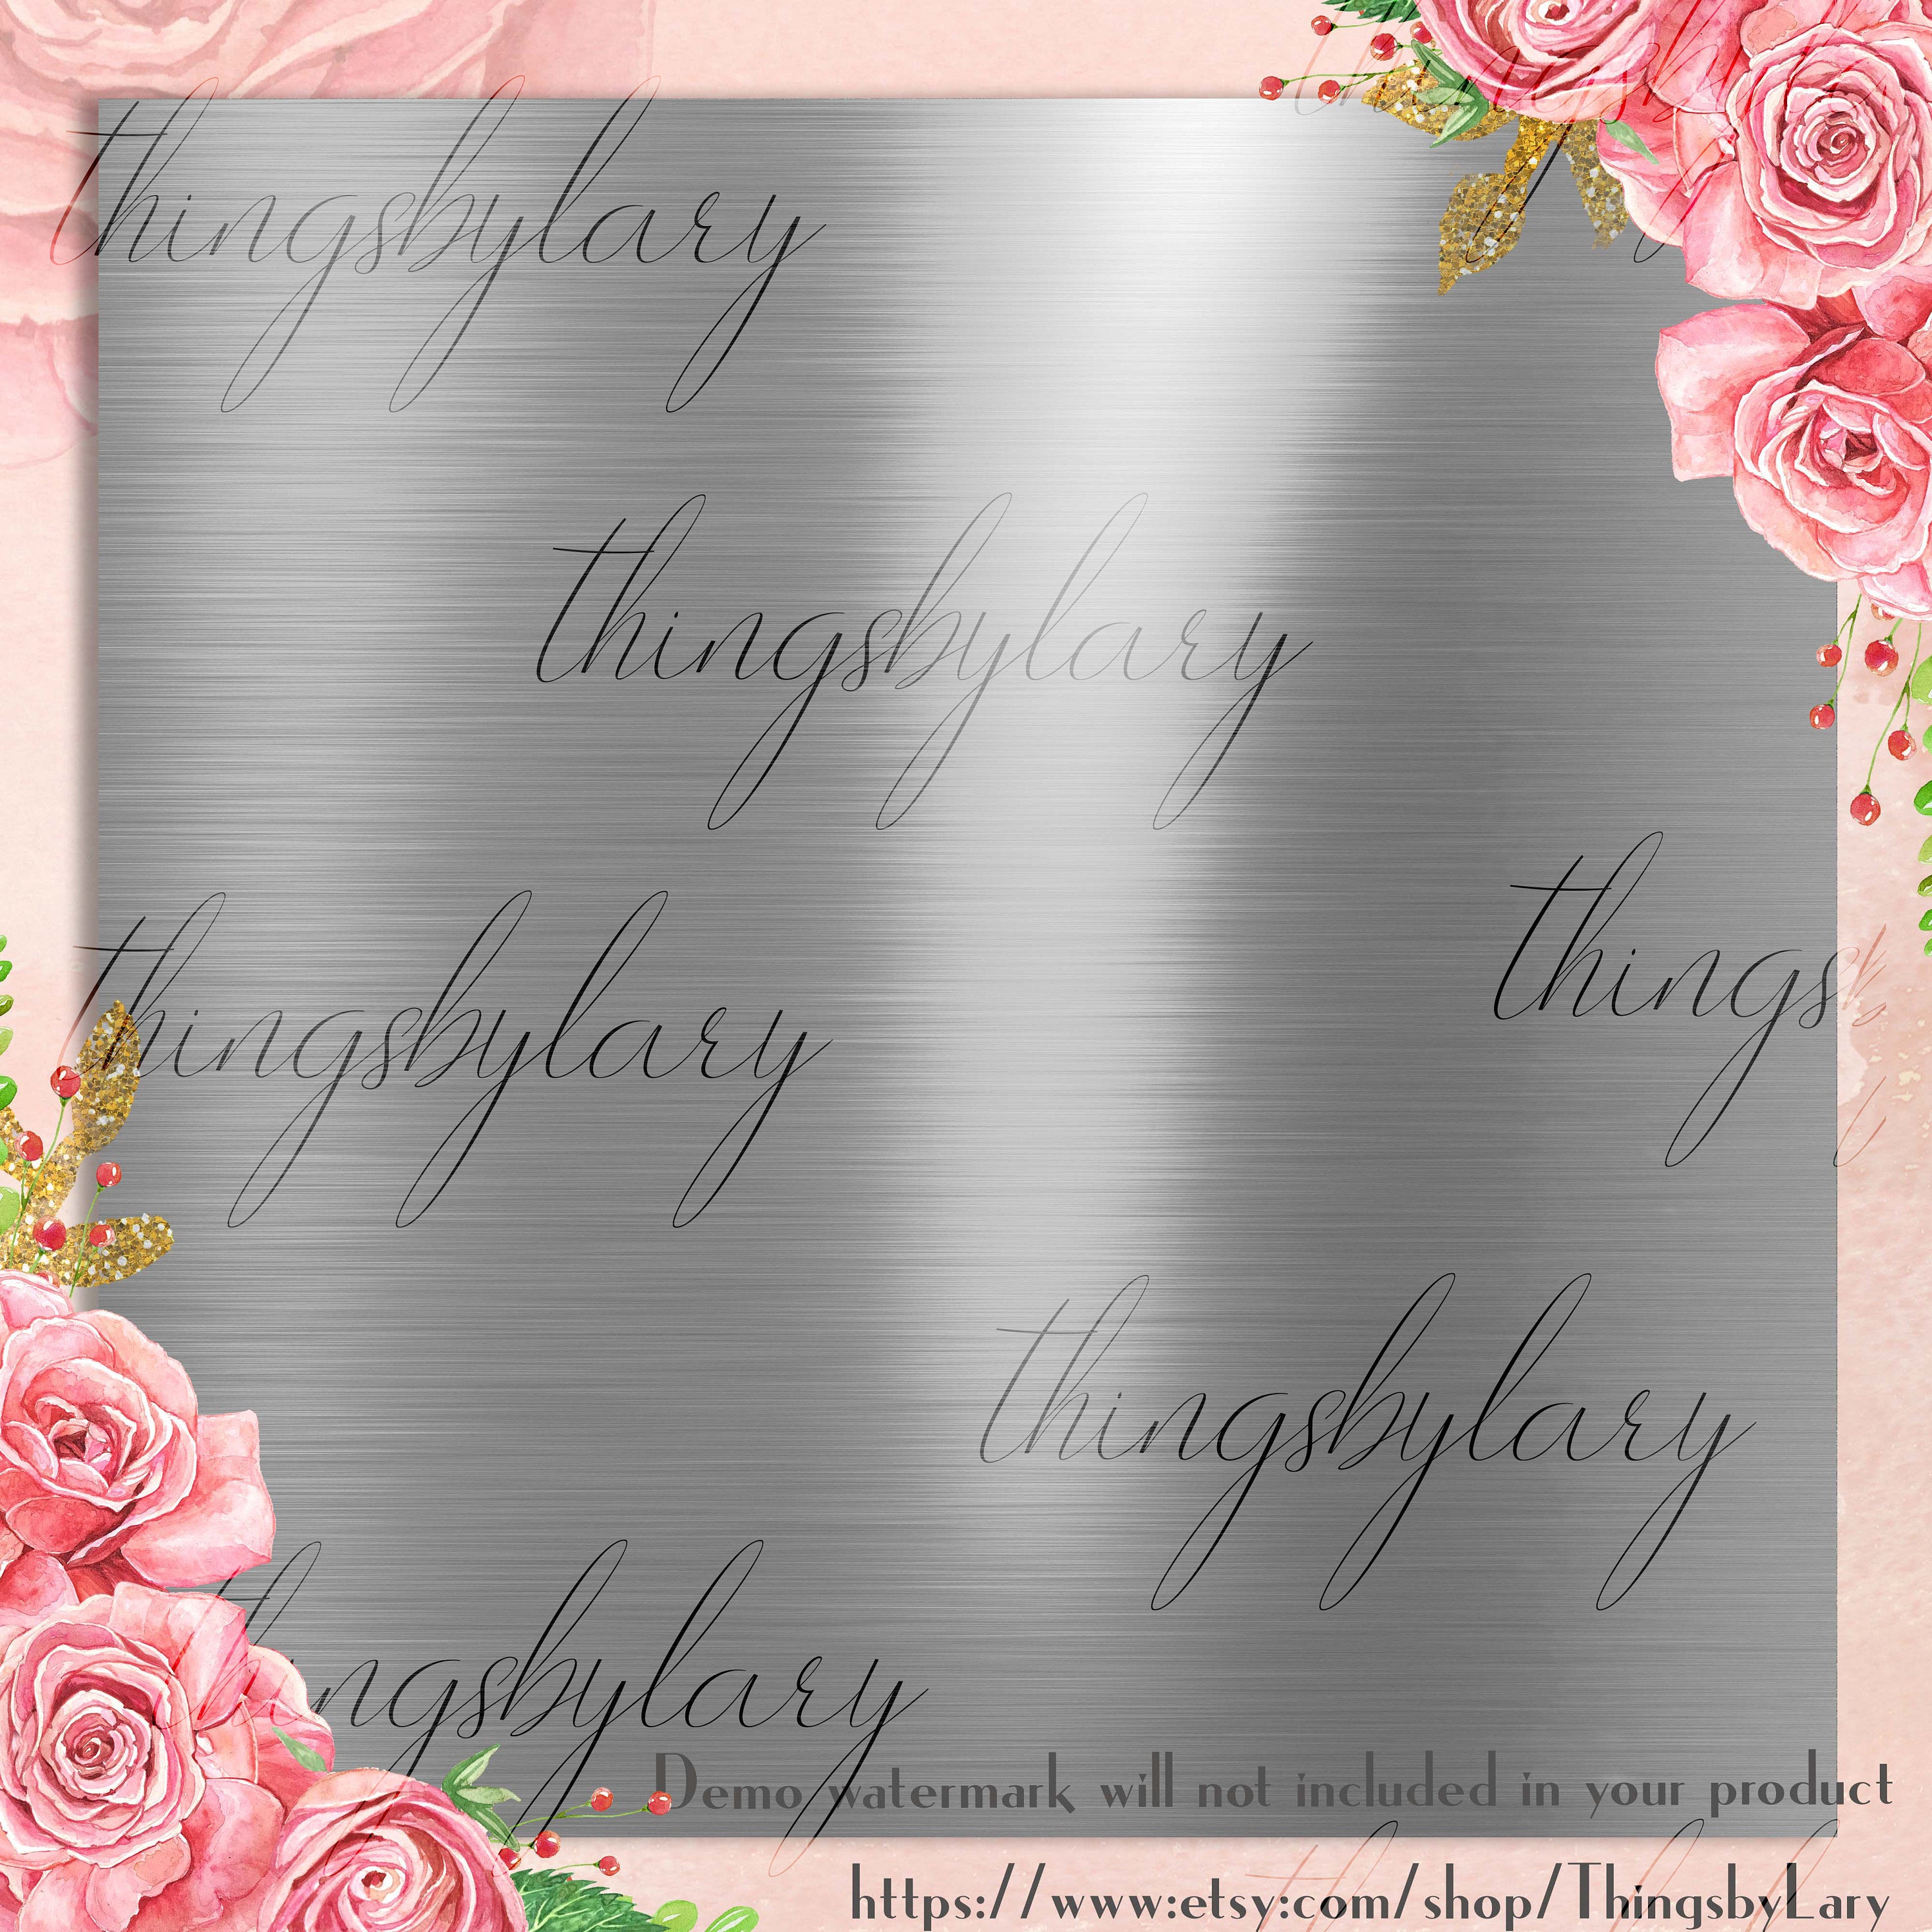 42 Silver Metallic Papers 12 inch, 300 Dpi Planner Paper, Commercial Use, Scrapbook Paper, Silver Metallic, Luxury Digital Silver Paper